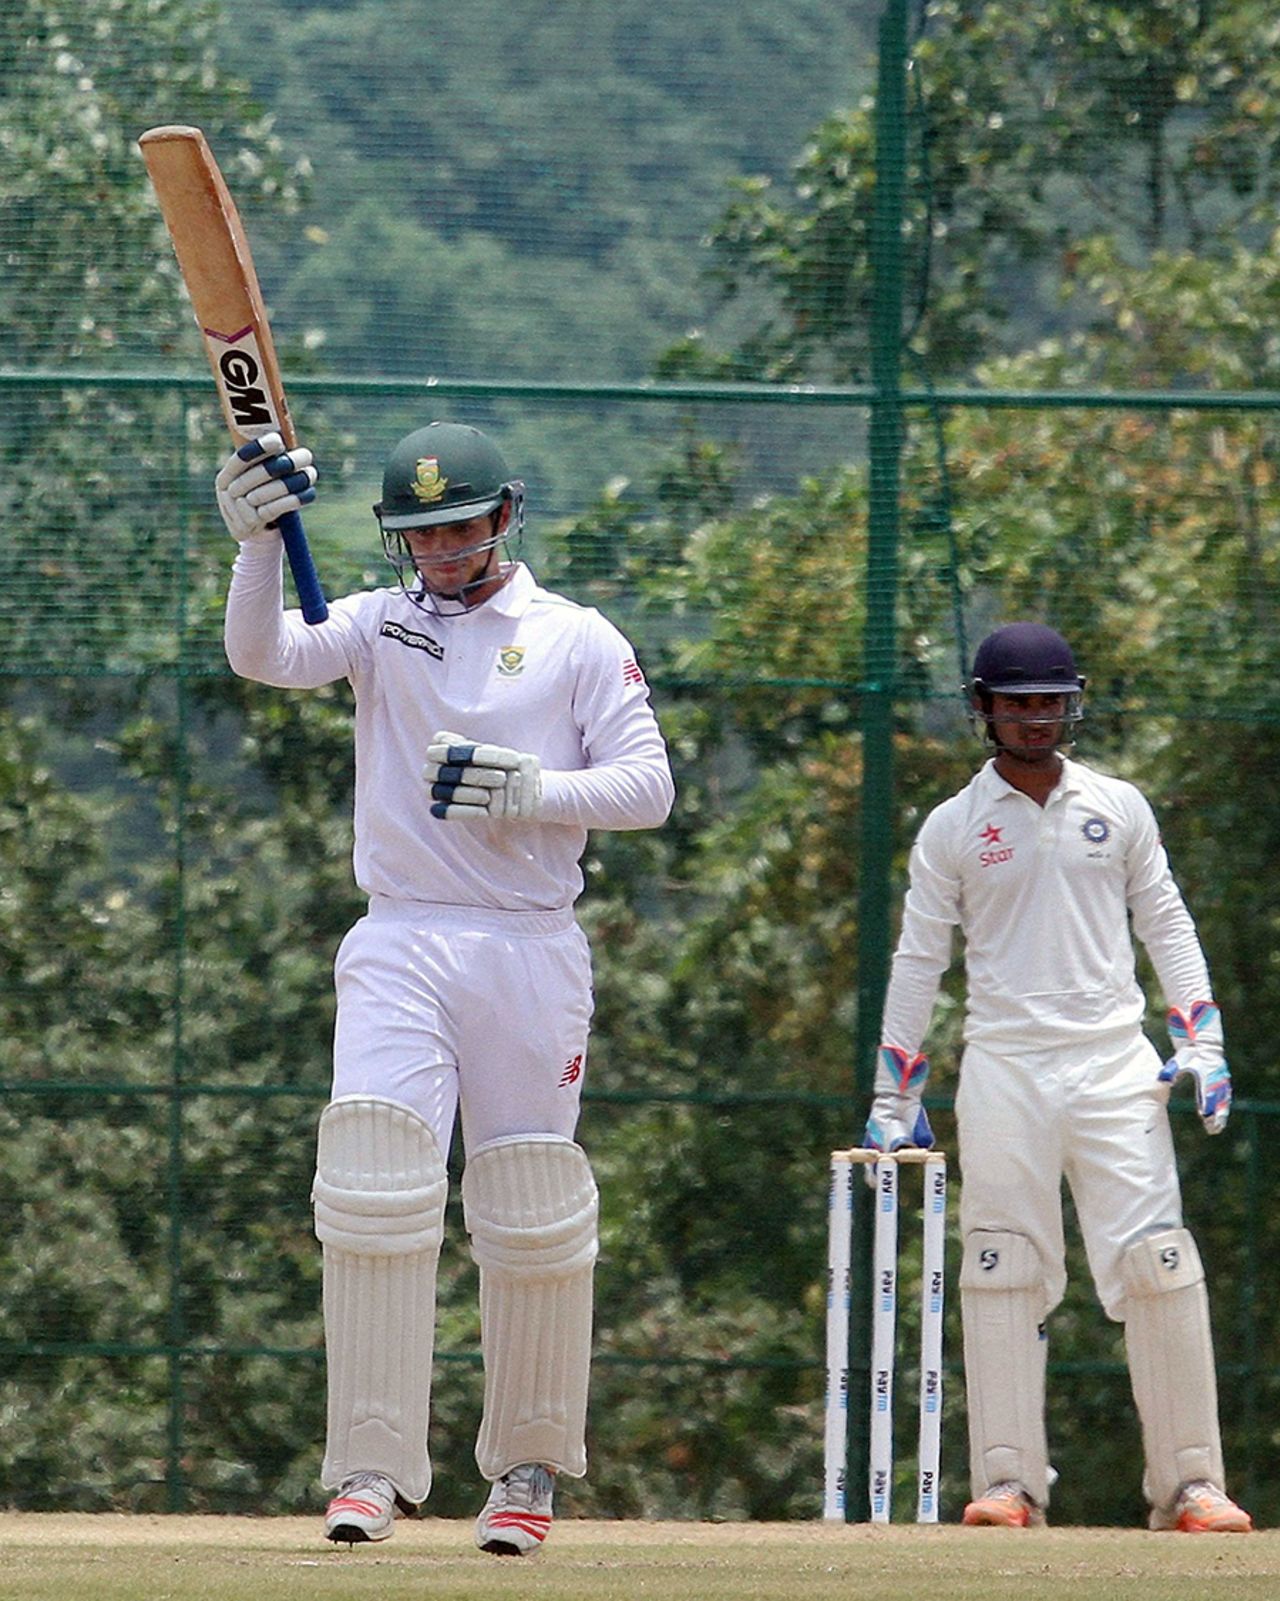 Quinton de Kock raises his bat after completing a century, India A v South Africa A, 1st unofficial Test, Wayanad, 2nd day, August 19, 2015